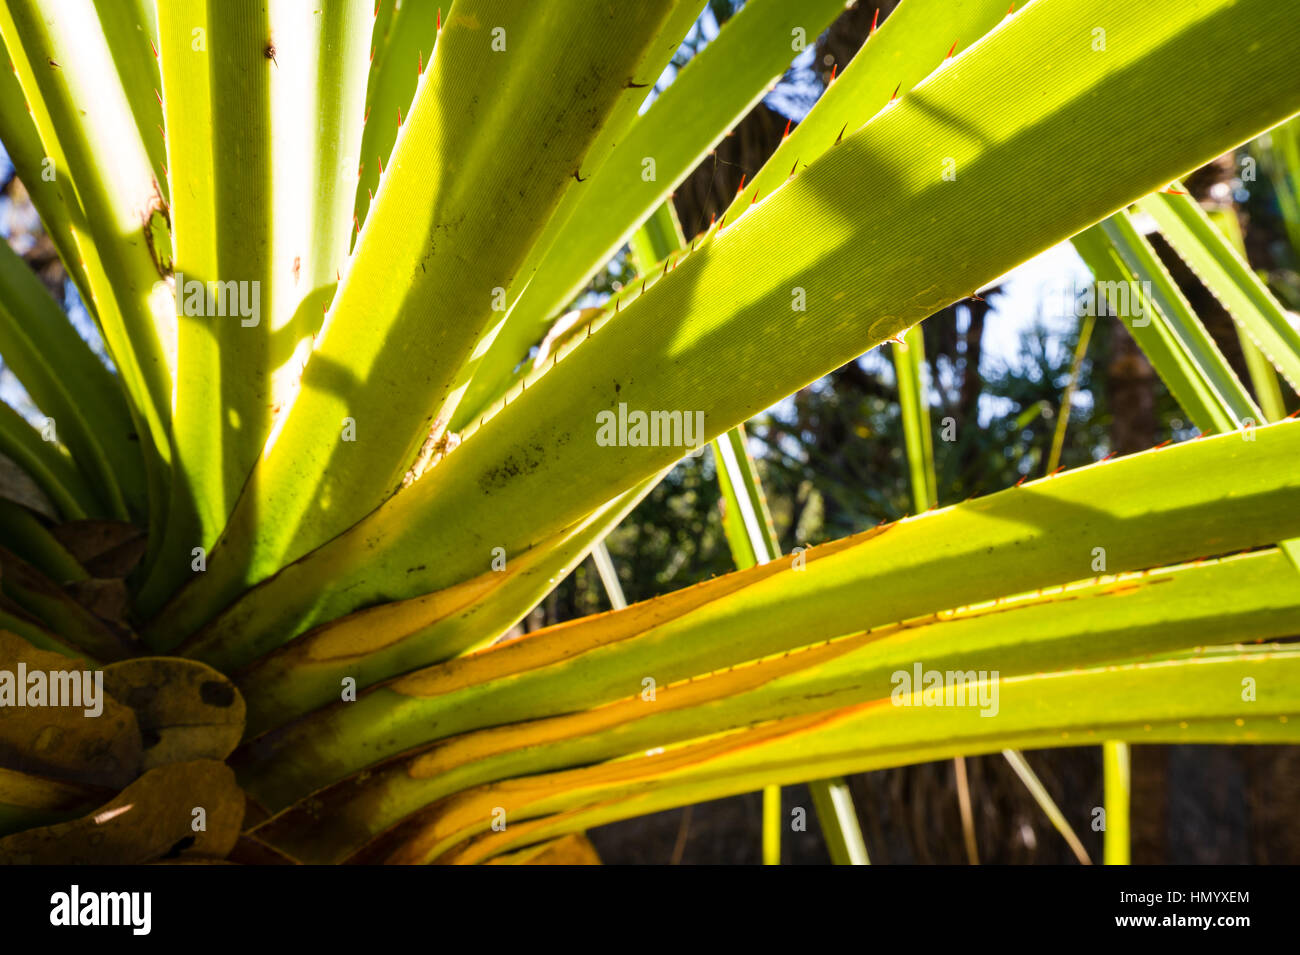 Sunlight pierces the spikey leaves of a Pandanus tree. Stock Photo